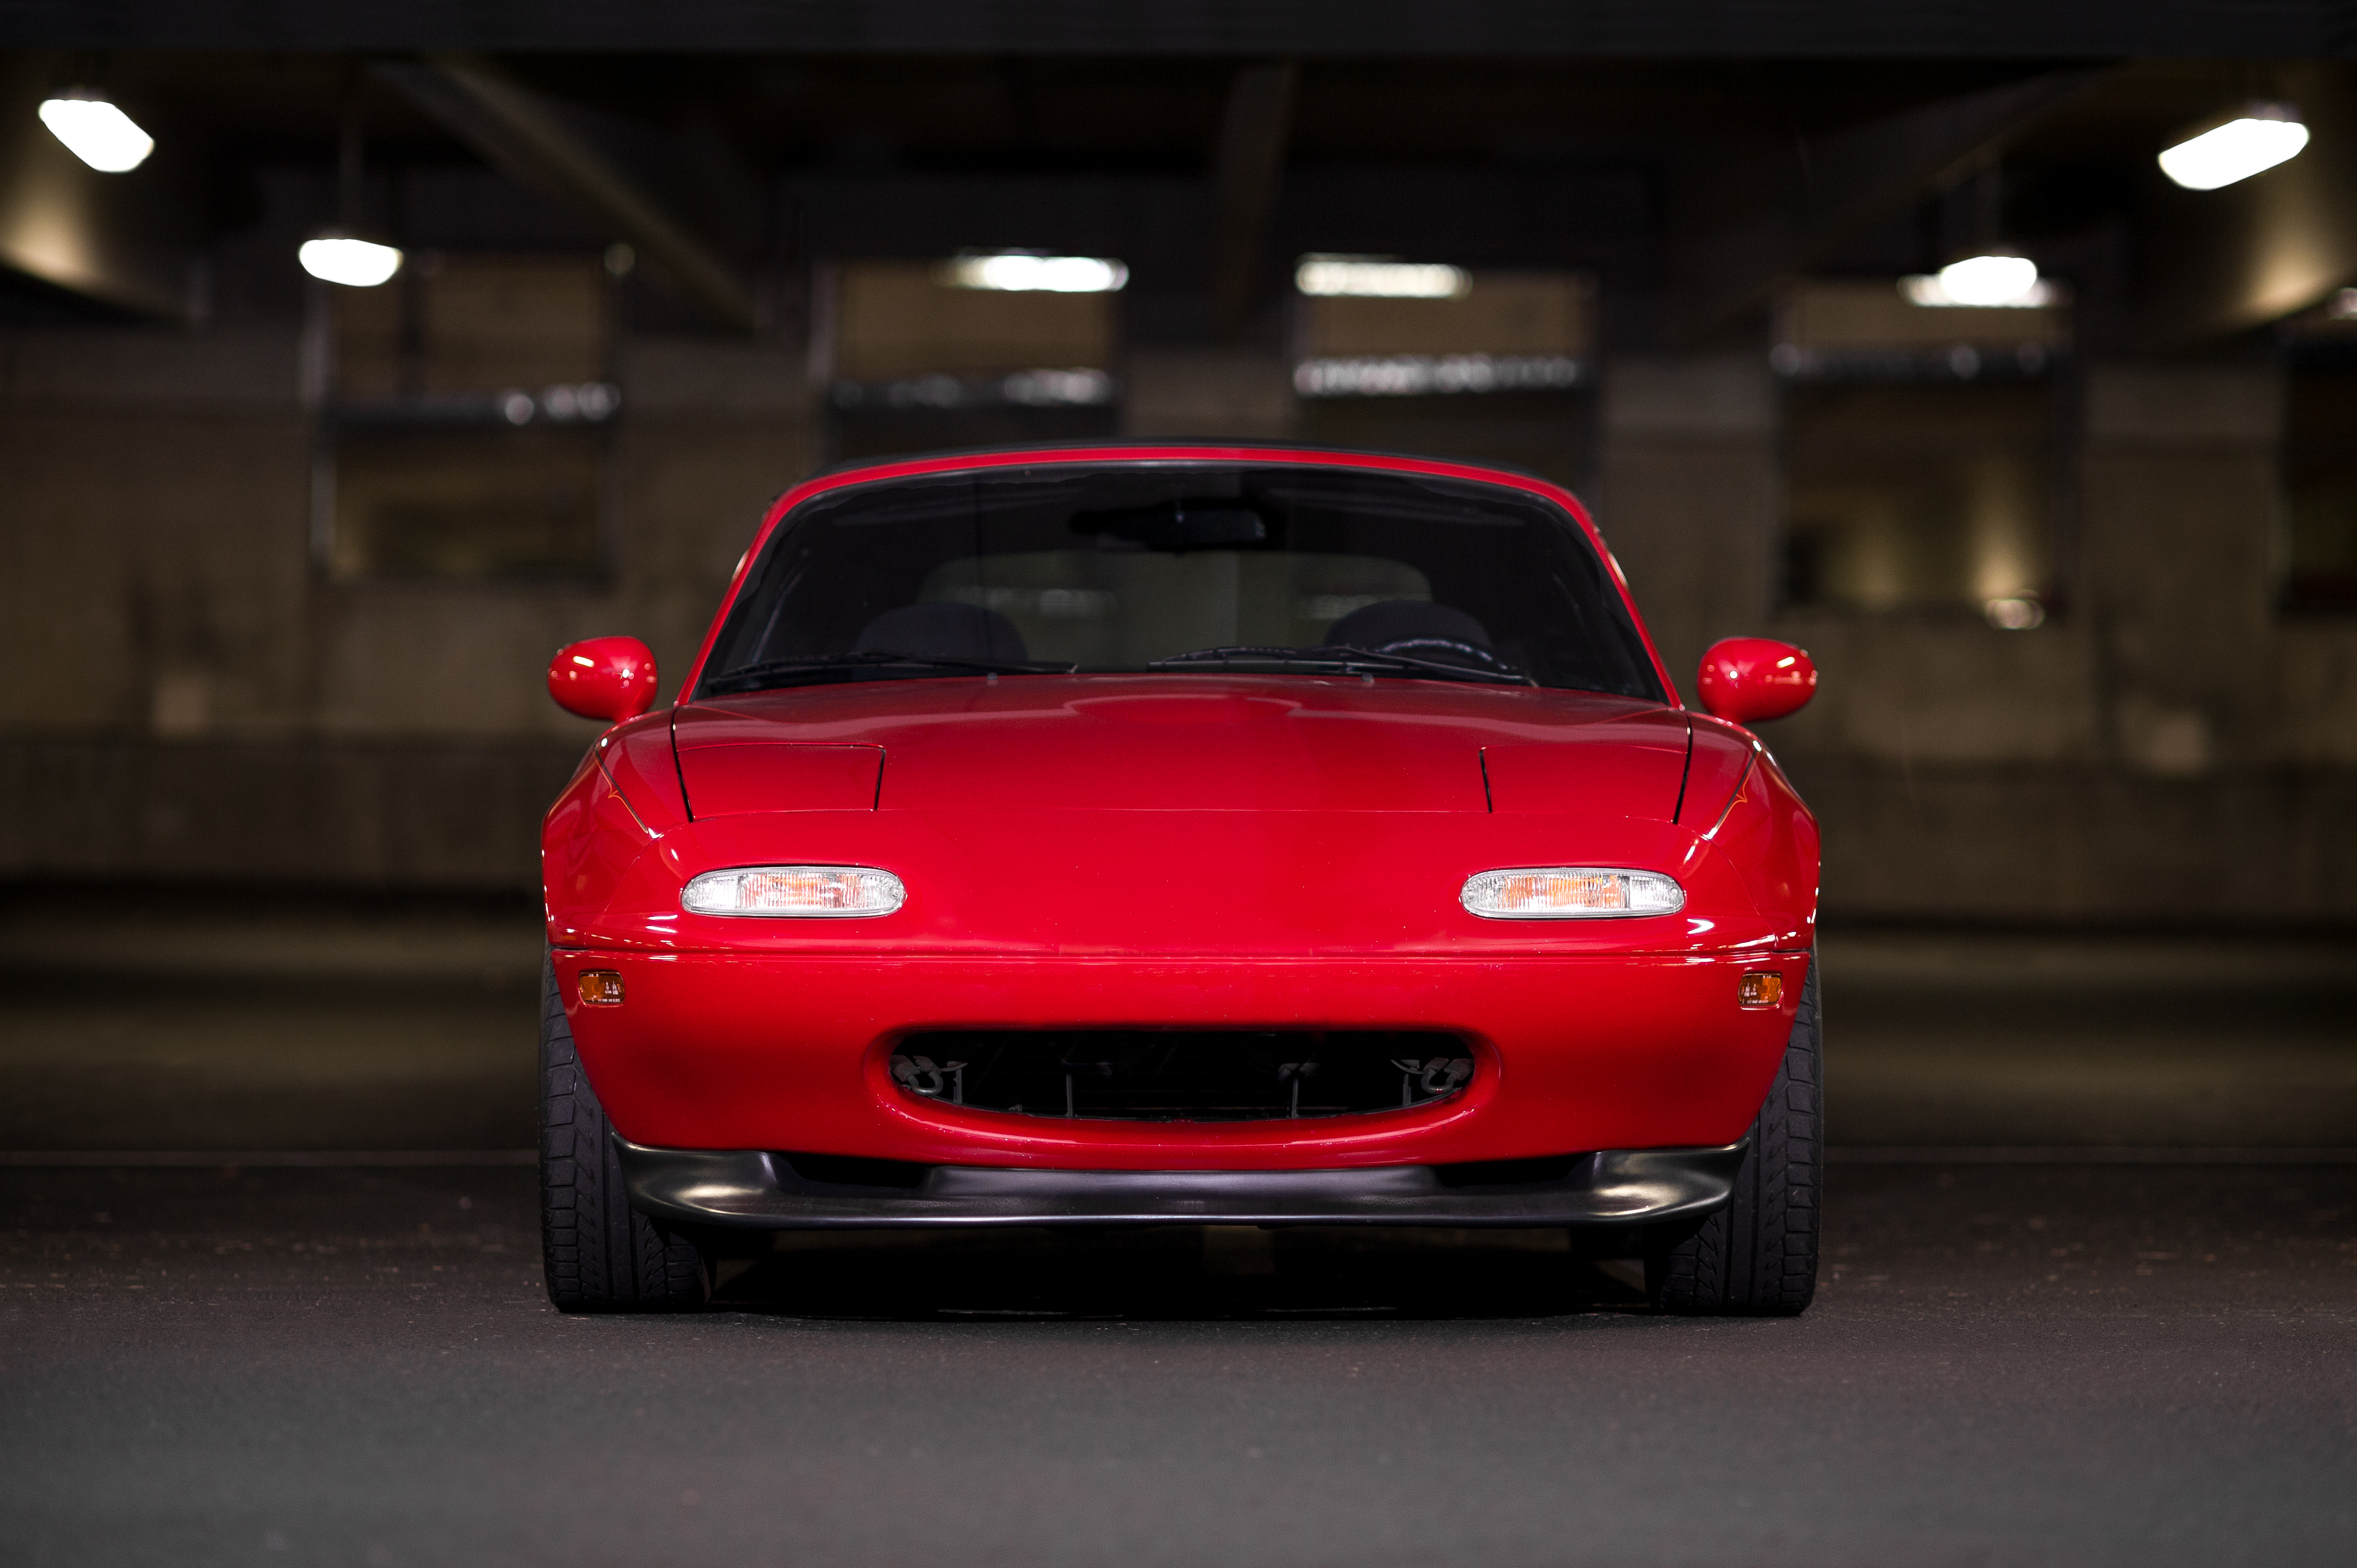 Your Ridiculously Adorable Mazda Miata Wallpaper Is Here